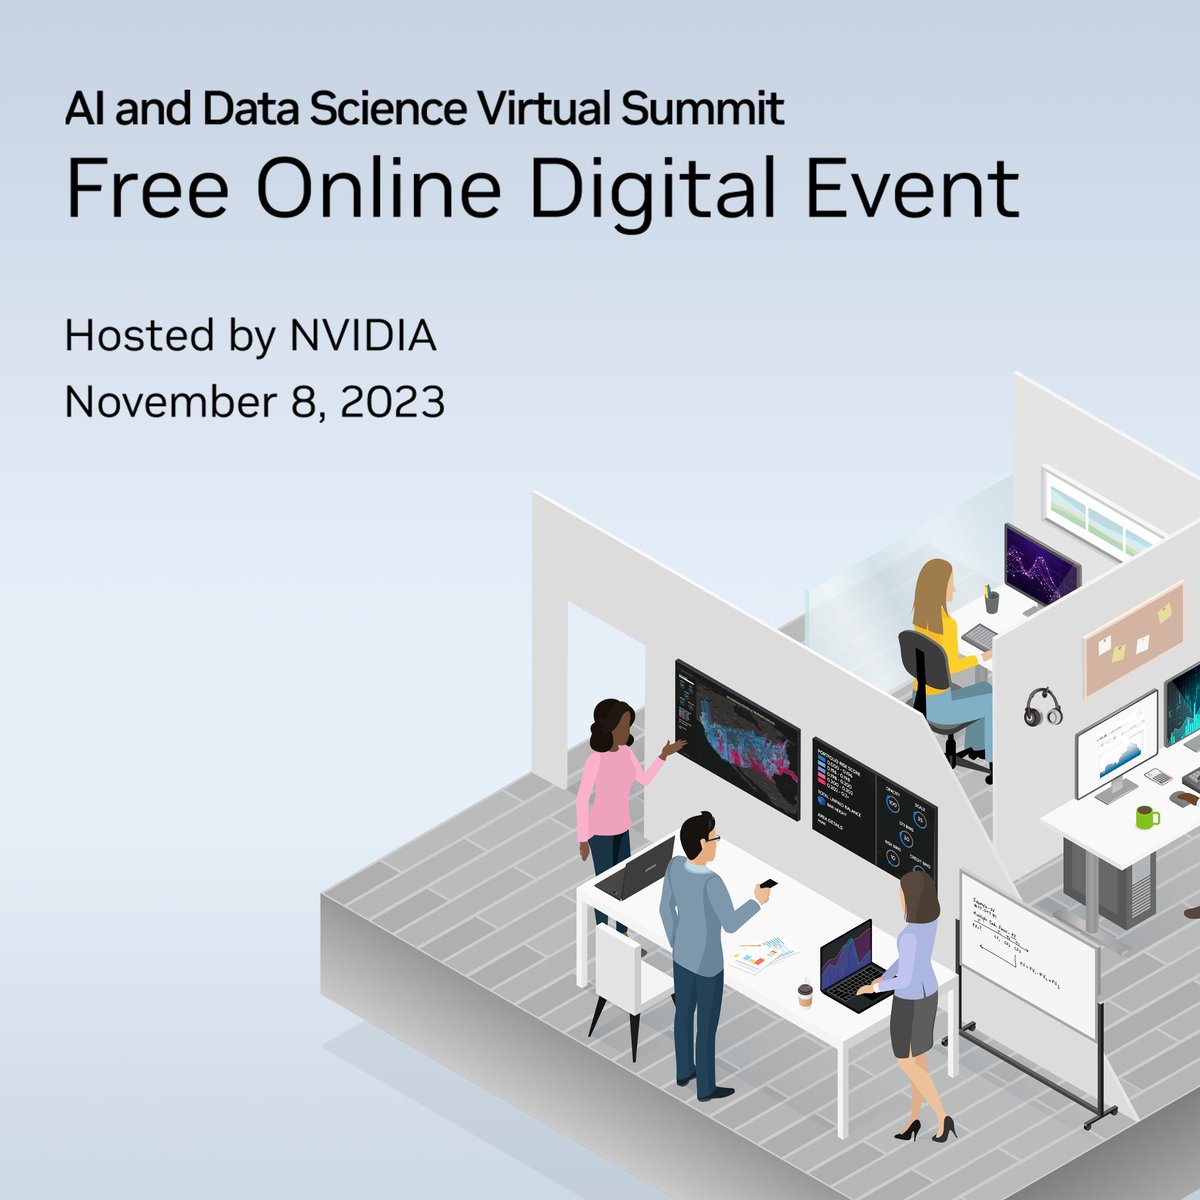 On Nov 8th, join us at the AI and Data Science Virtual Summit for the opportunity to engage in interactive online discussions with industry leaders, researchers, & Kaggle Grandmasters. Check out the session lineup & register for free today: nvda.ws/3tuV79x. See you there!